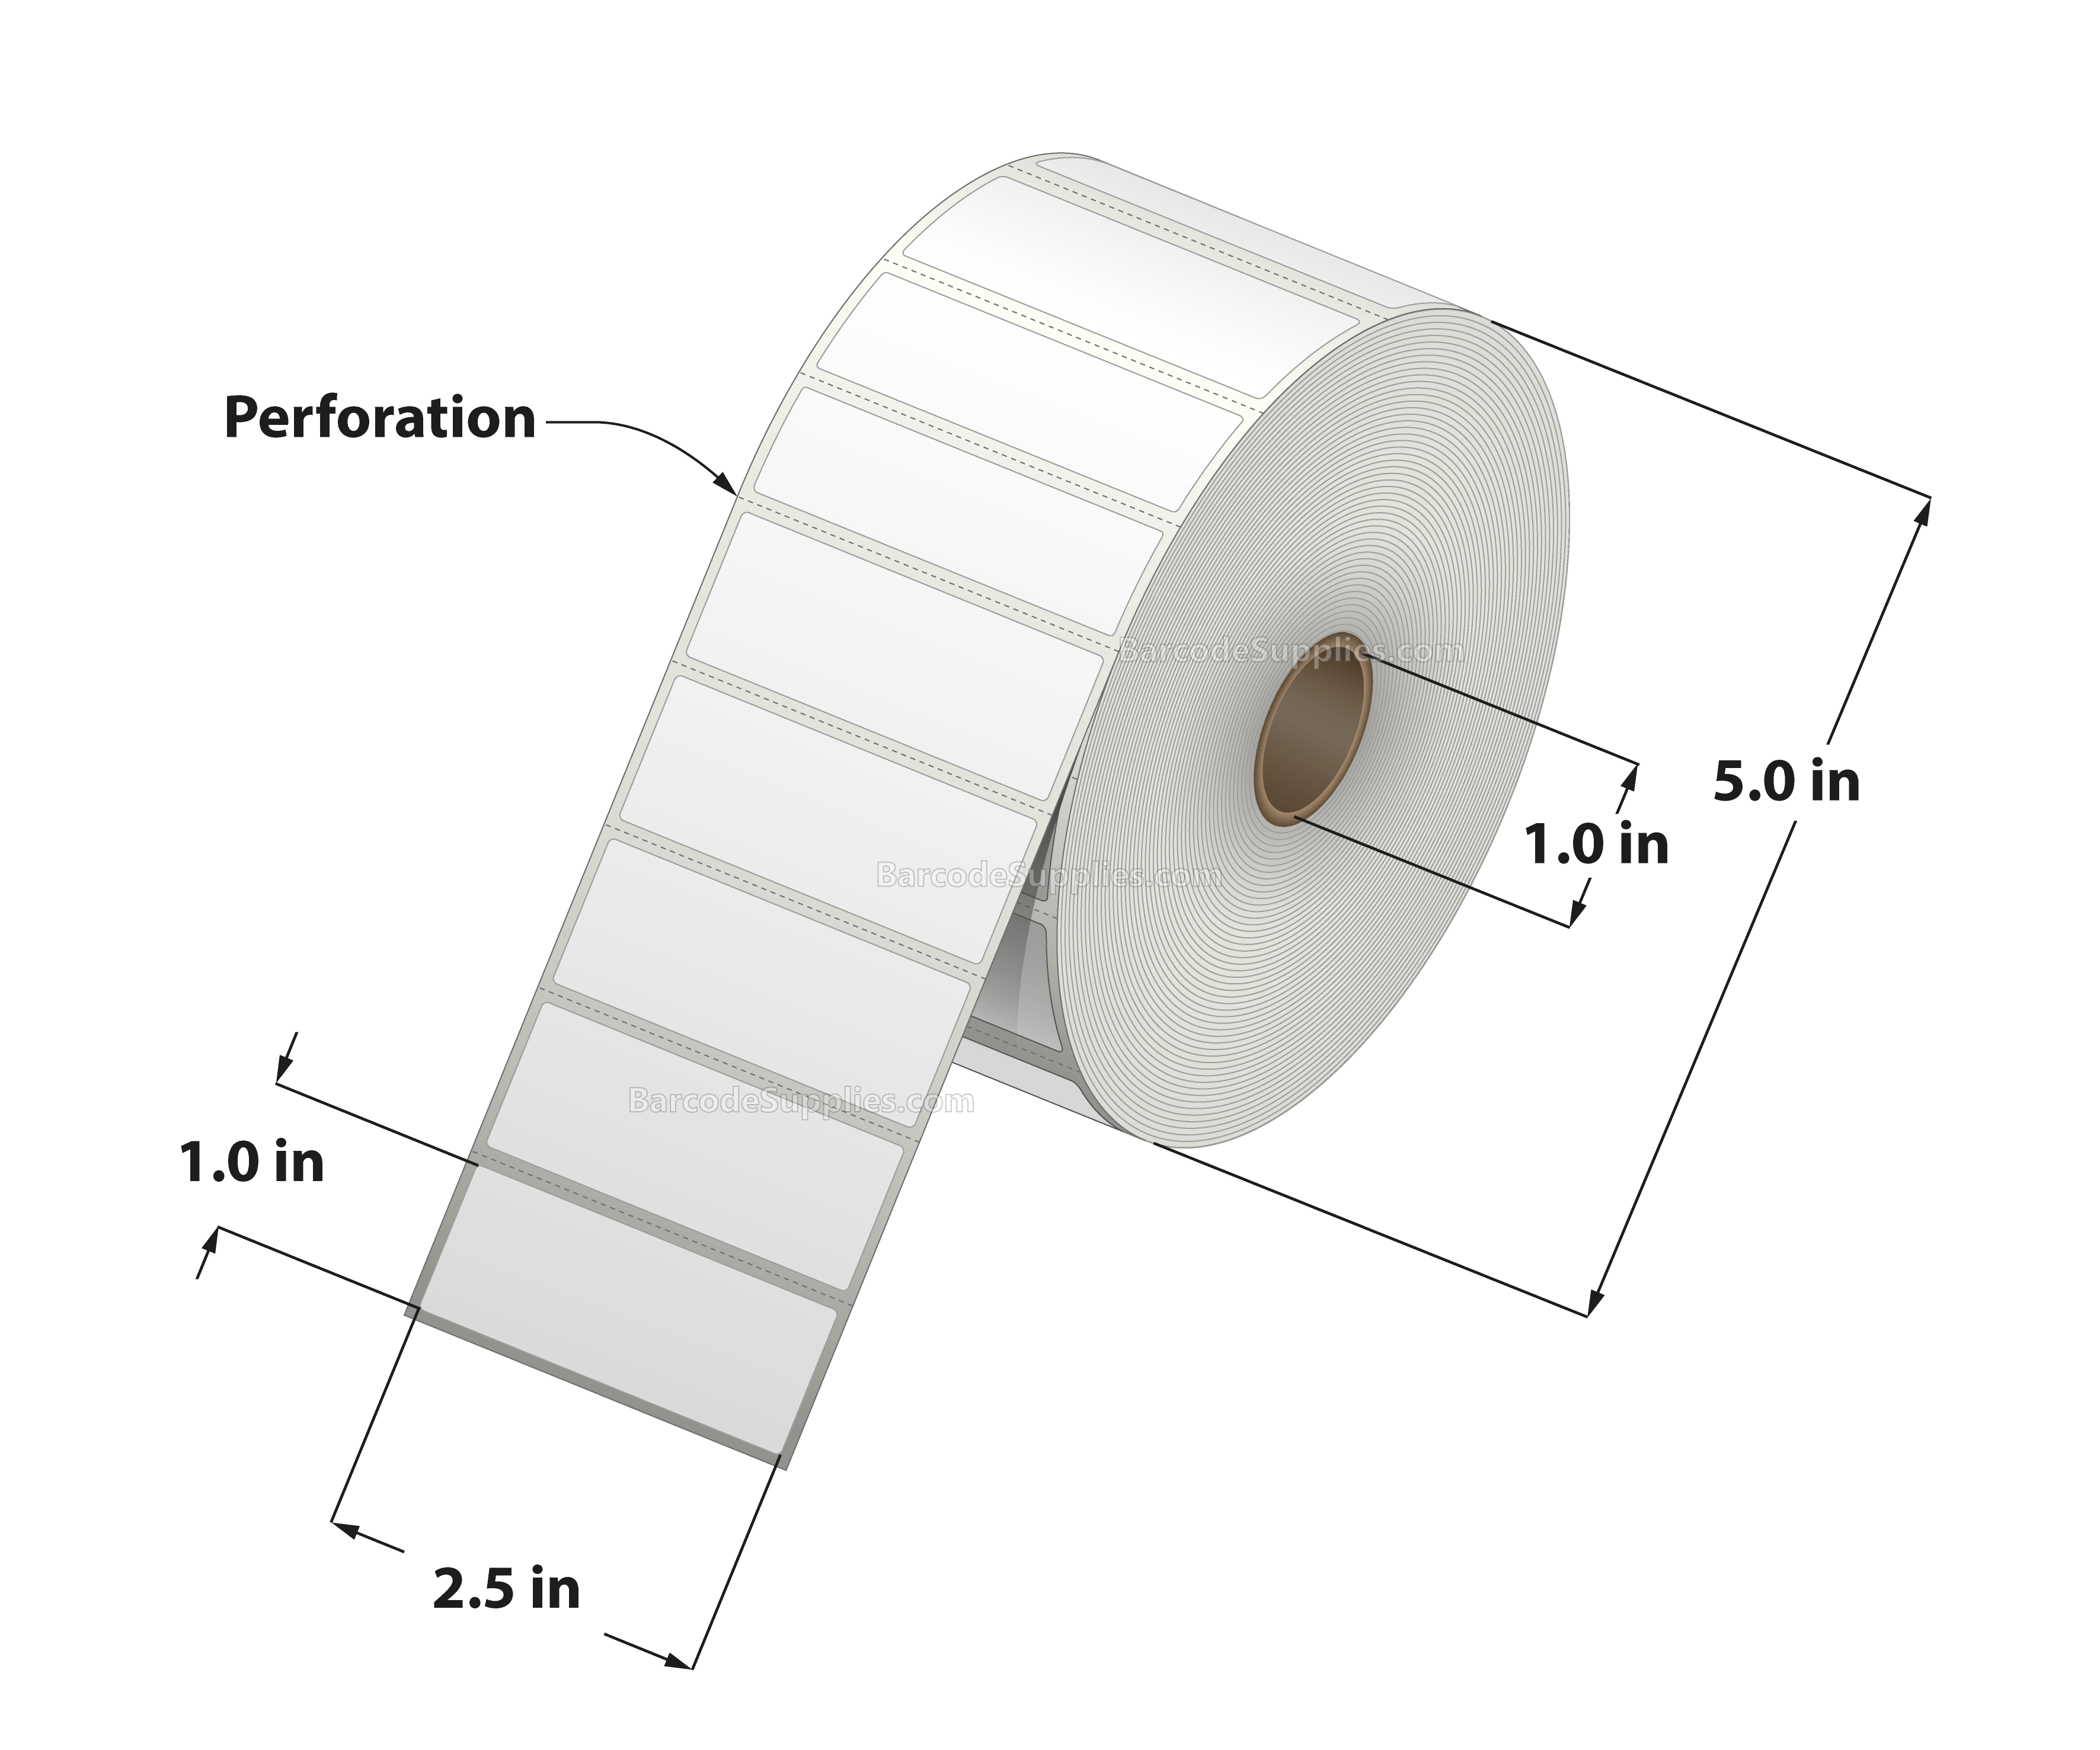 2.5 x 1 Thermal Transfer White Labels With Permanent Adhesive - Perforated - 2500 Labels Per Roll - Carton Of 12 Rolls - 30000 Labels Total - MPN: RT-25-1-2500-1 - BarcodeSource, Inc.